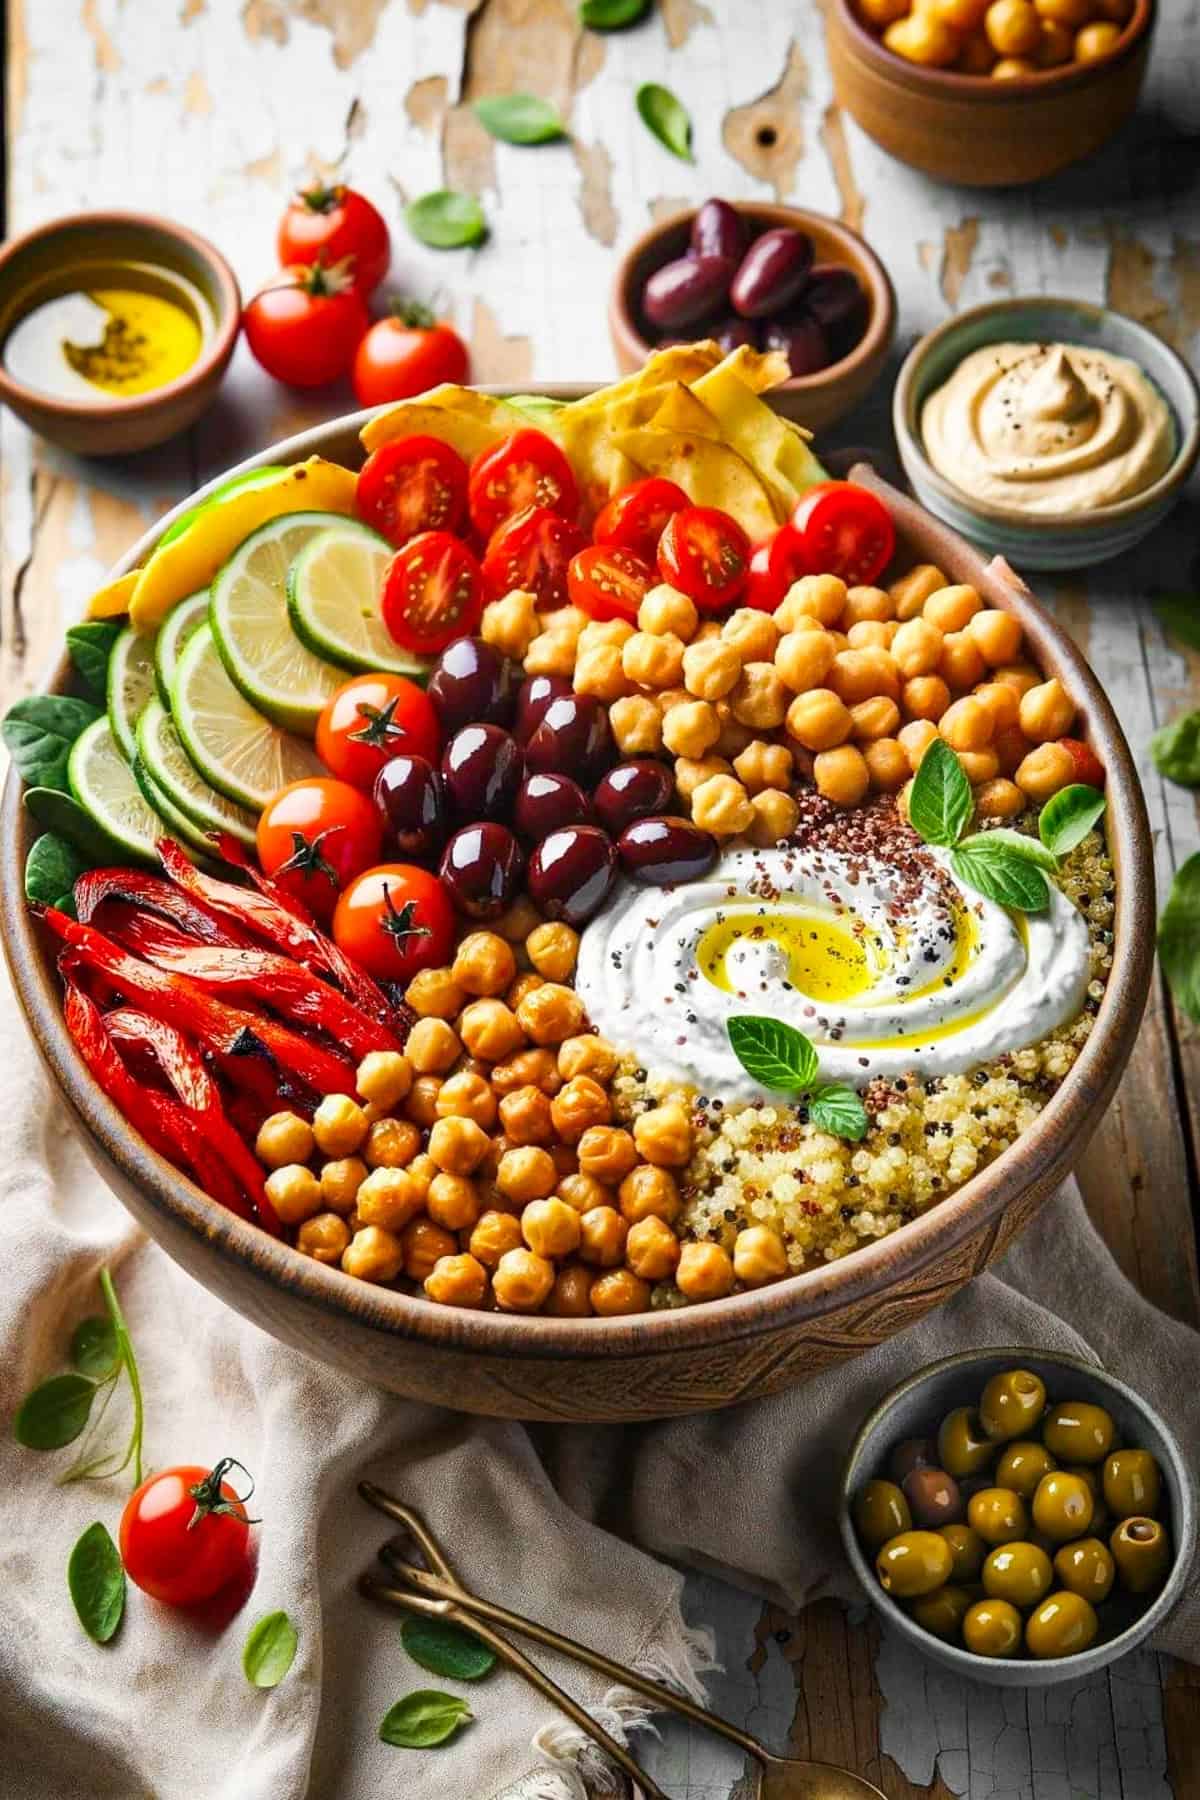 Overhead of a bowl with quinoa, chickpeas, sliced red peppers, halved cherry tomatoes, cucumbers, olives, and tzatziki.